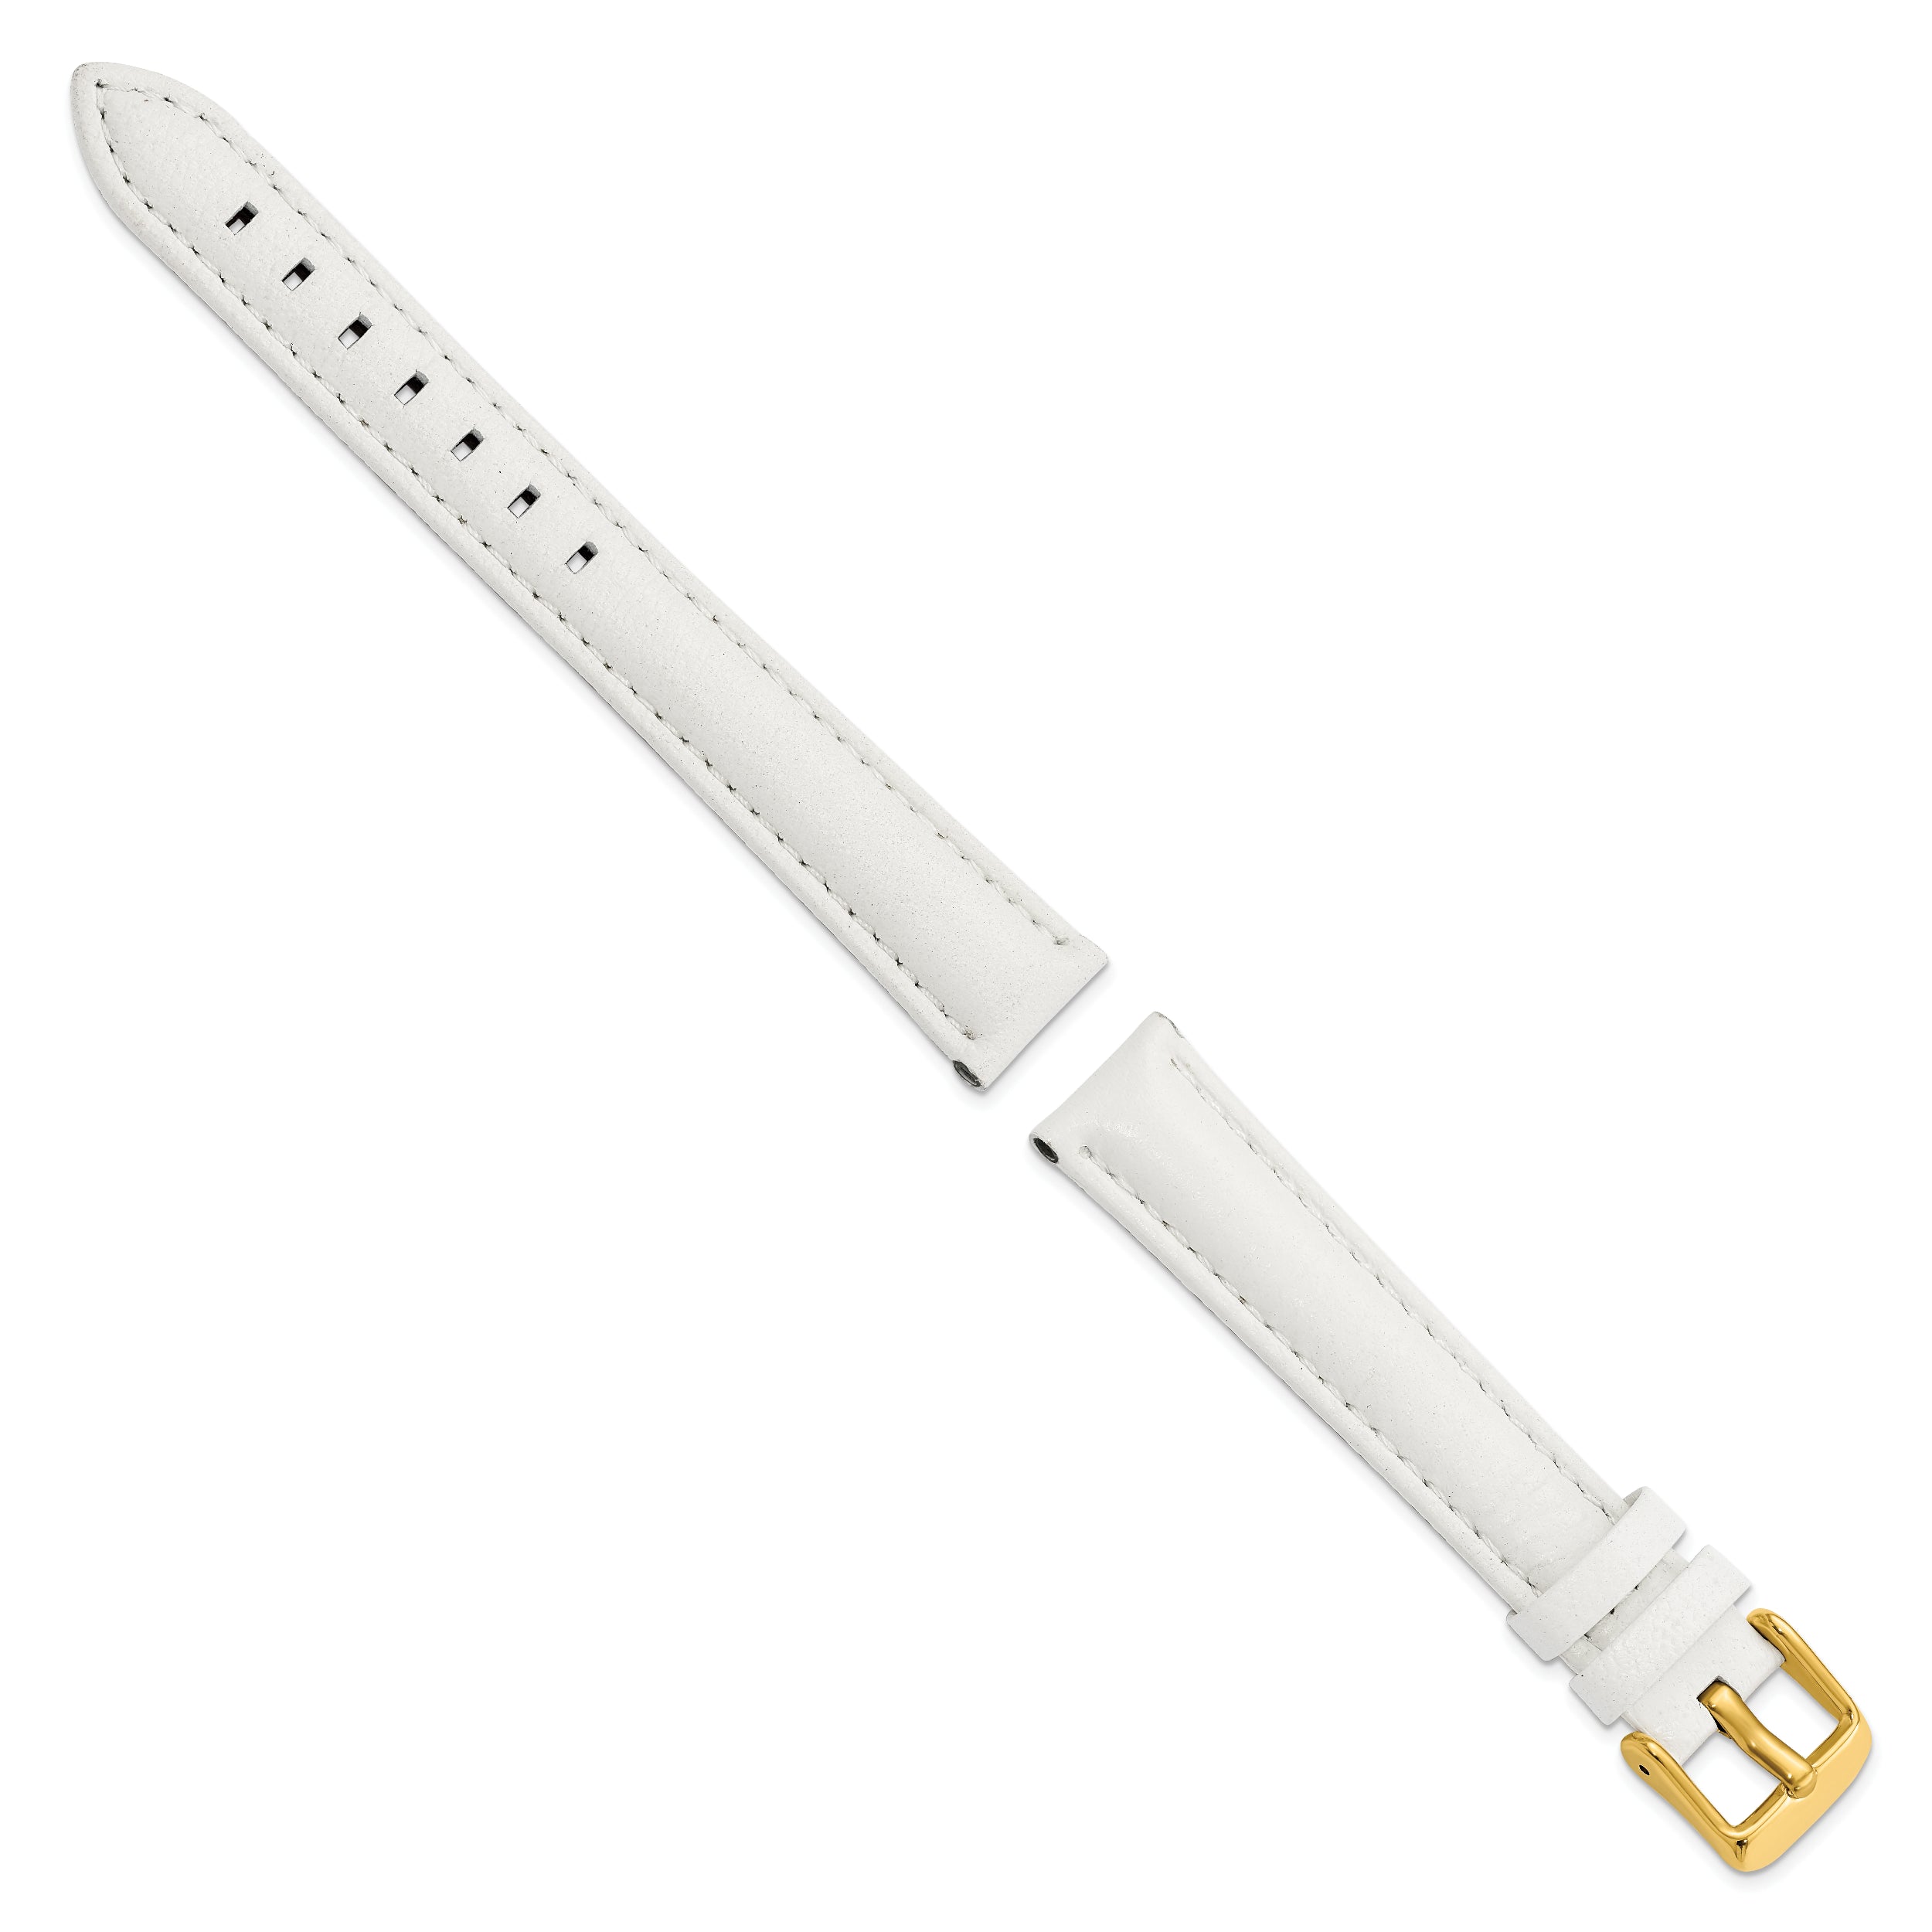 14mm White Glove Leather with Gold-tone Panerai Style Buckle 6.75 inch Watch Band